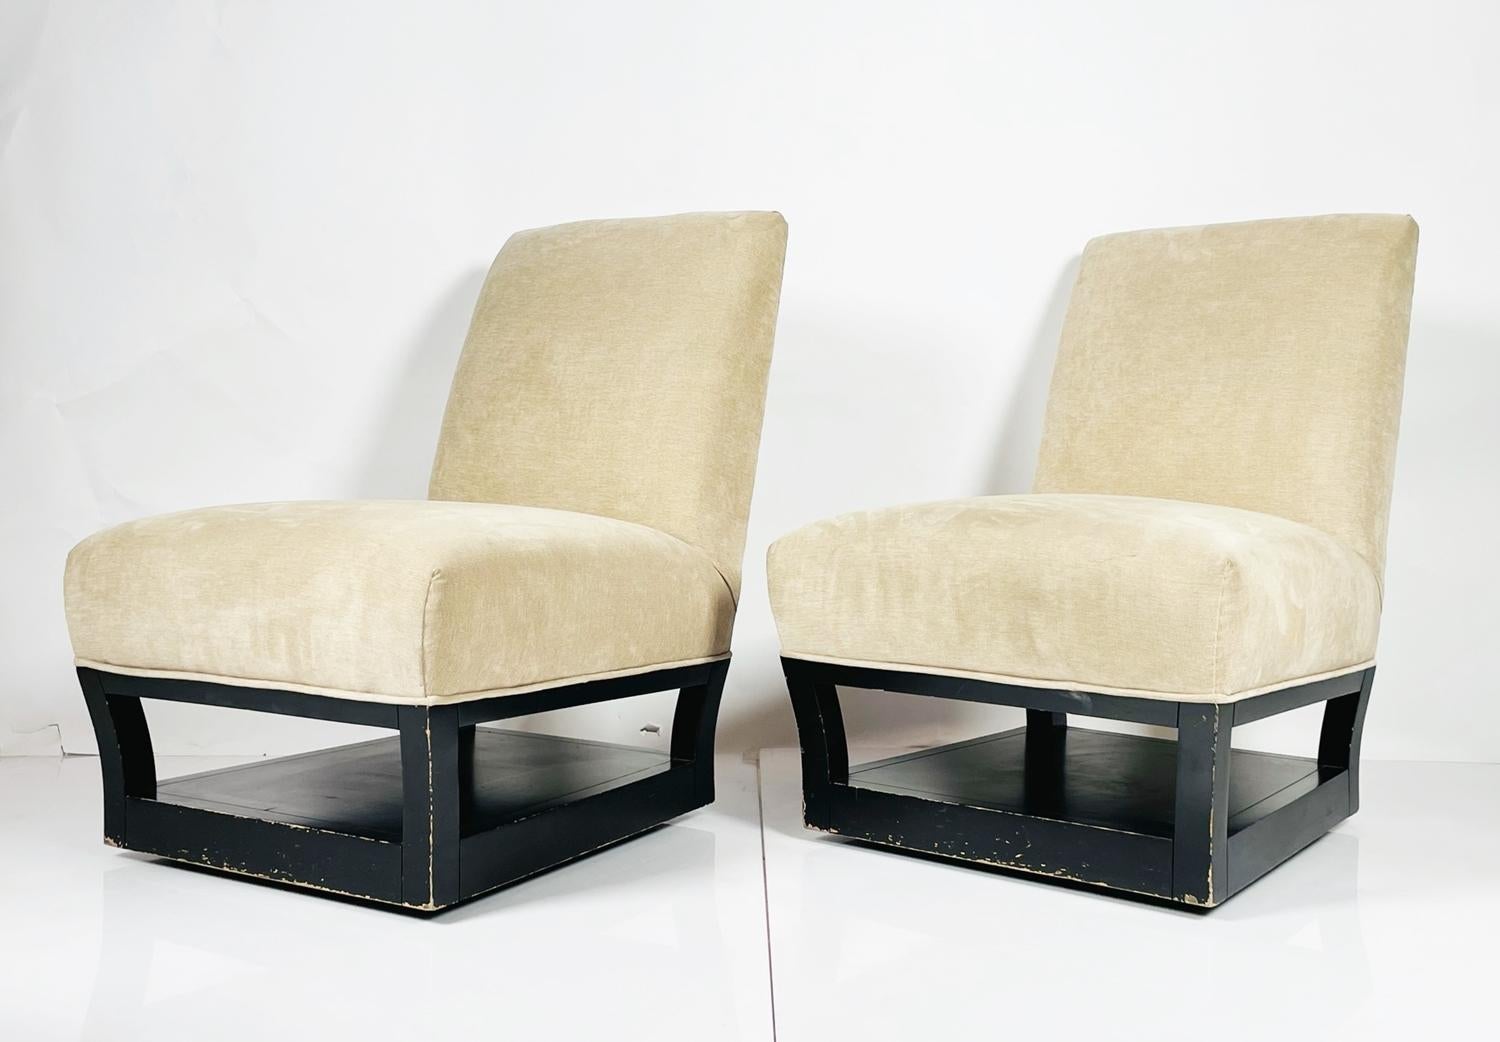 American Pair of Slipper Chairs with Magazine/Shoe Shelf by John Hutton for Donghia